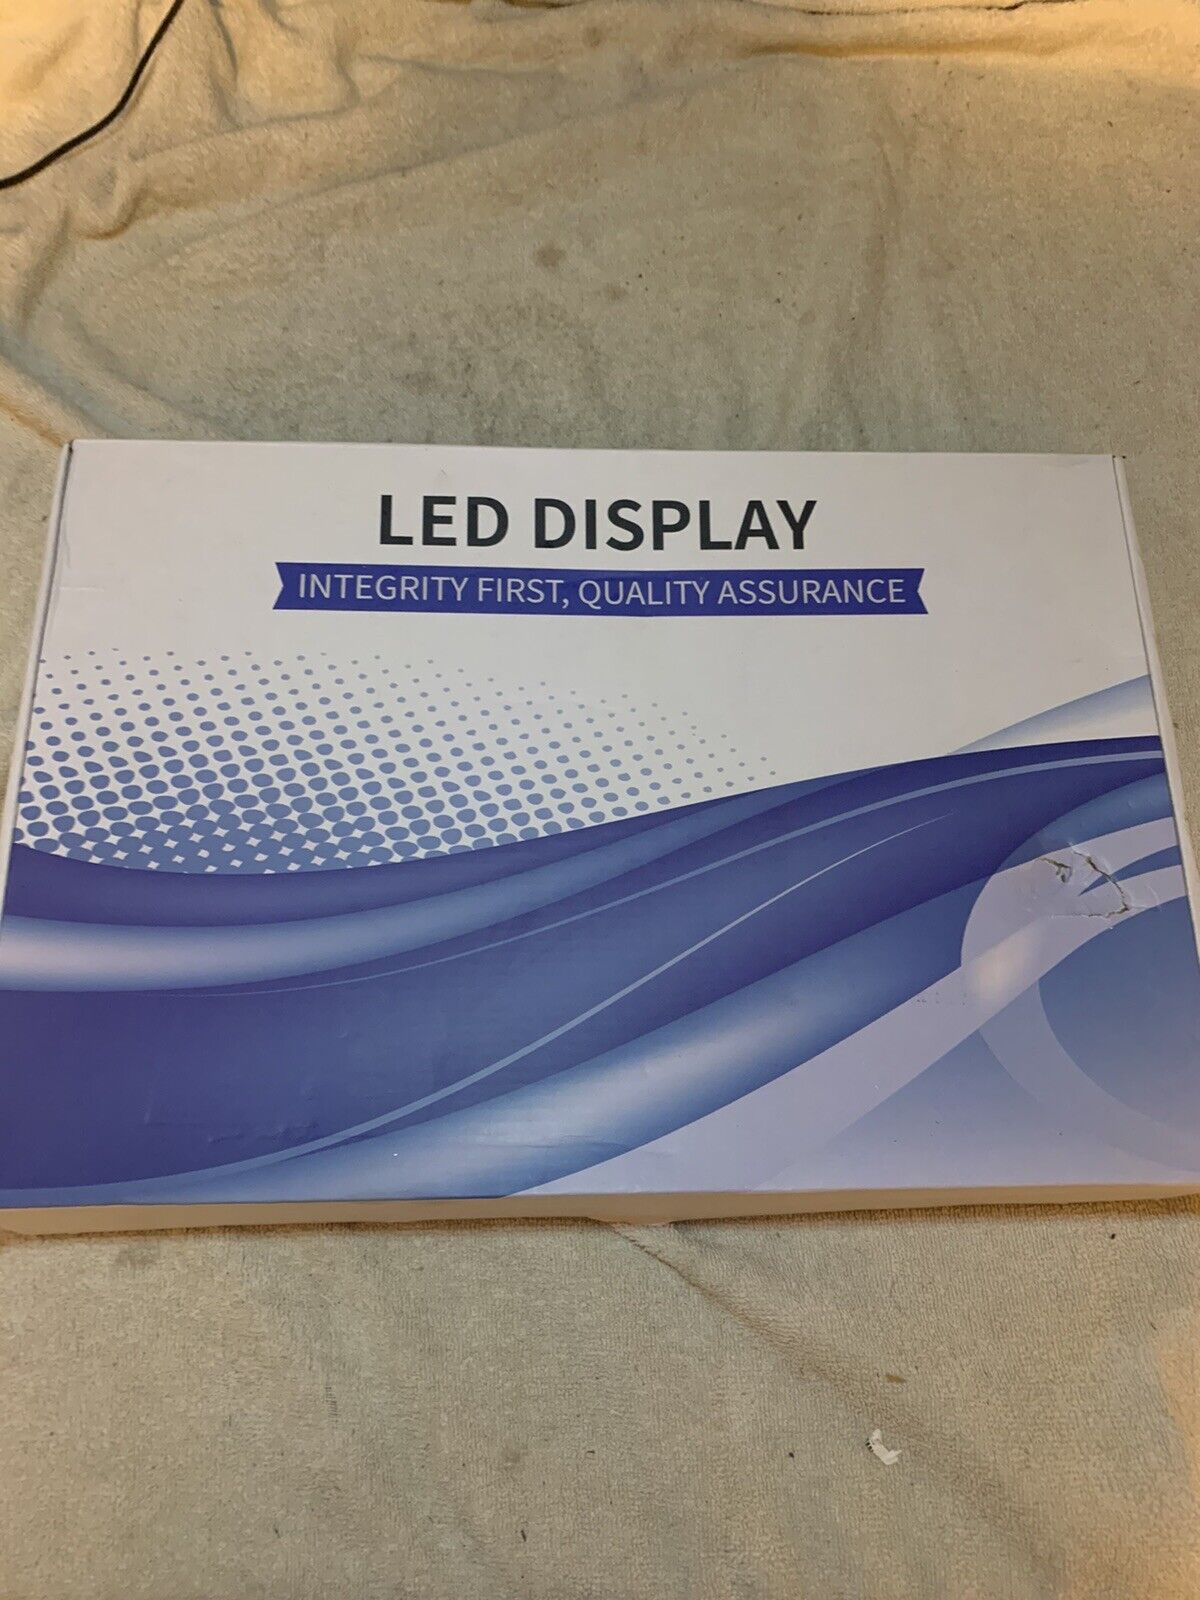 Led display integrity first quality assurance 14-inch portable monitor 